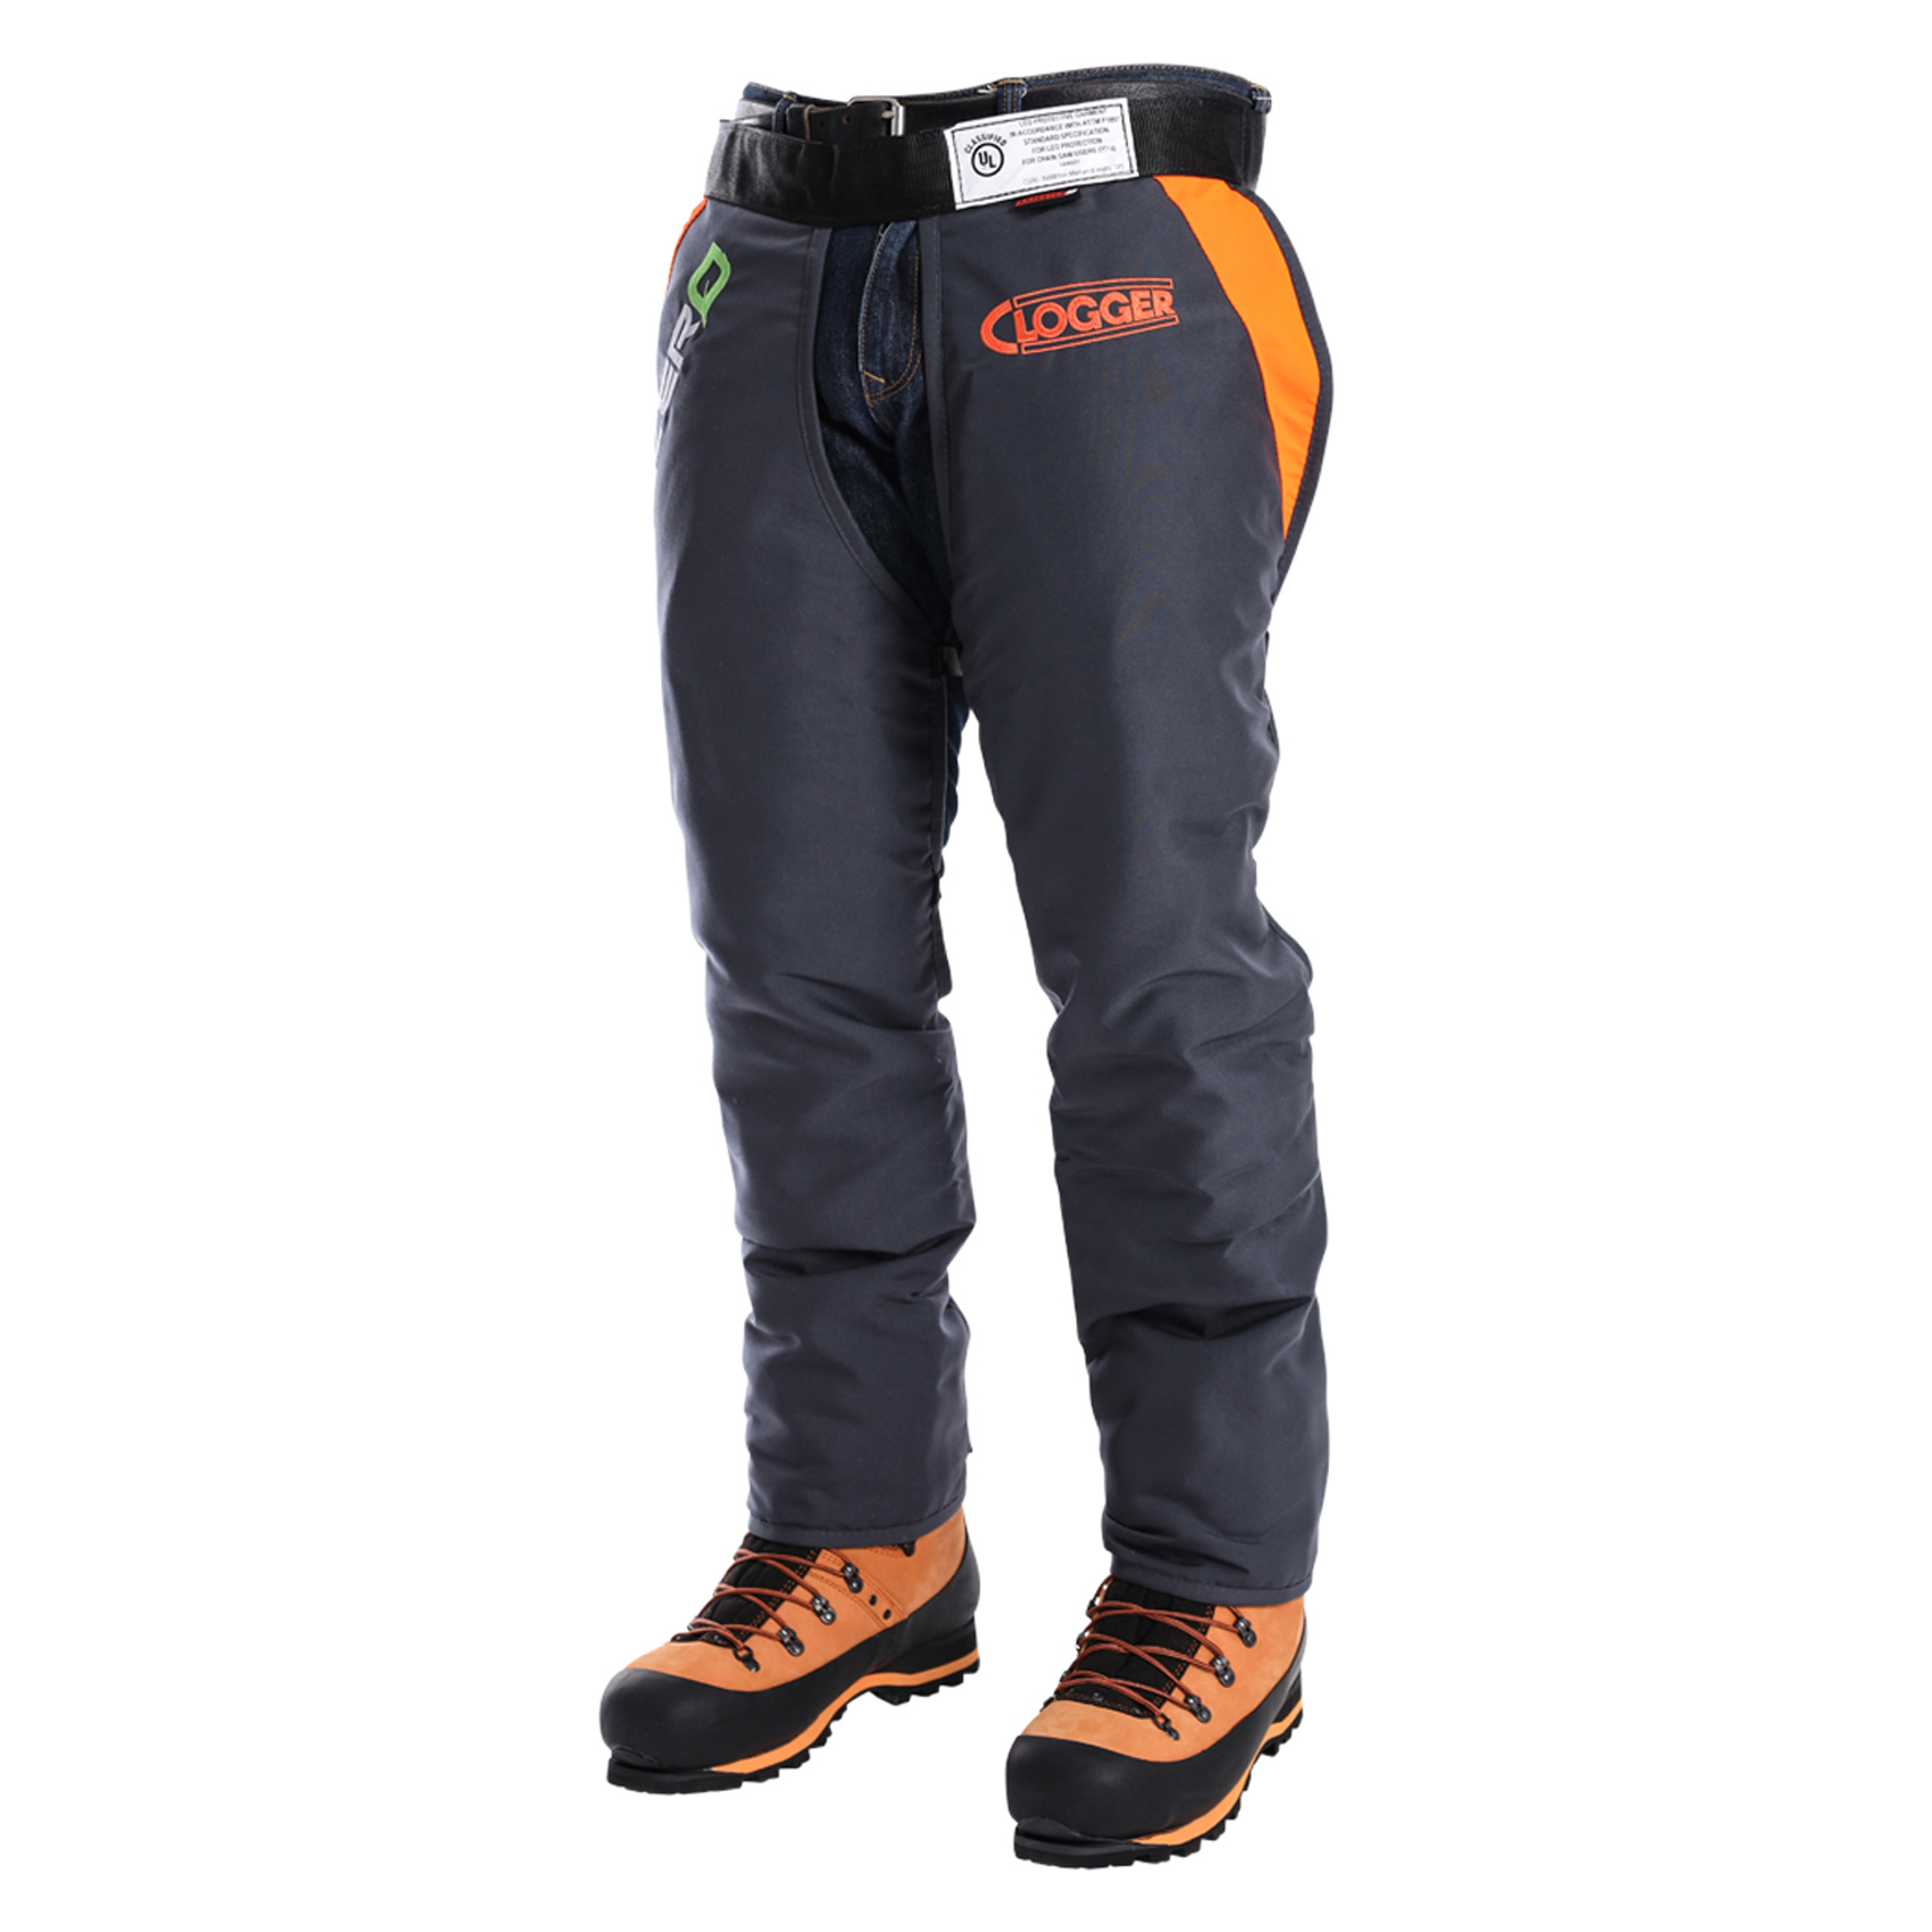 Zero Light and Cool Chainsaw Chaps - Clogger